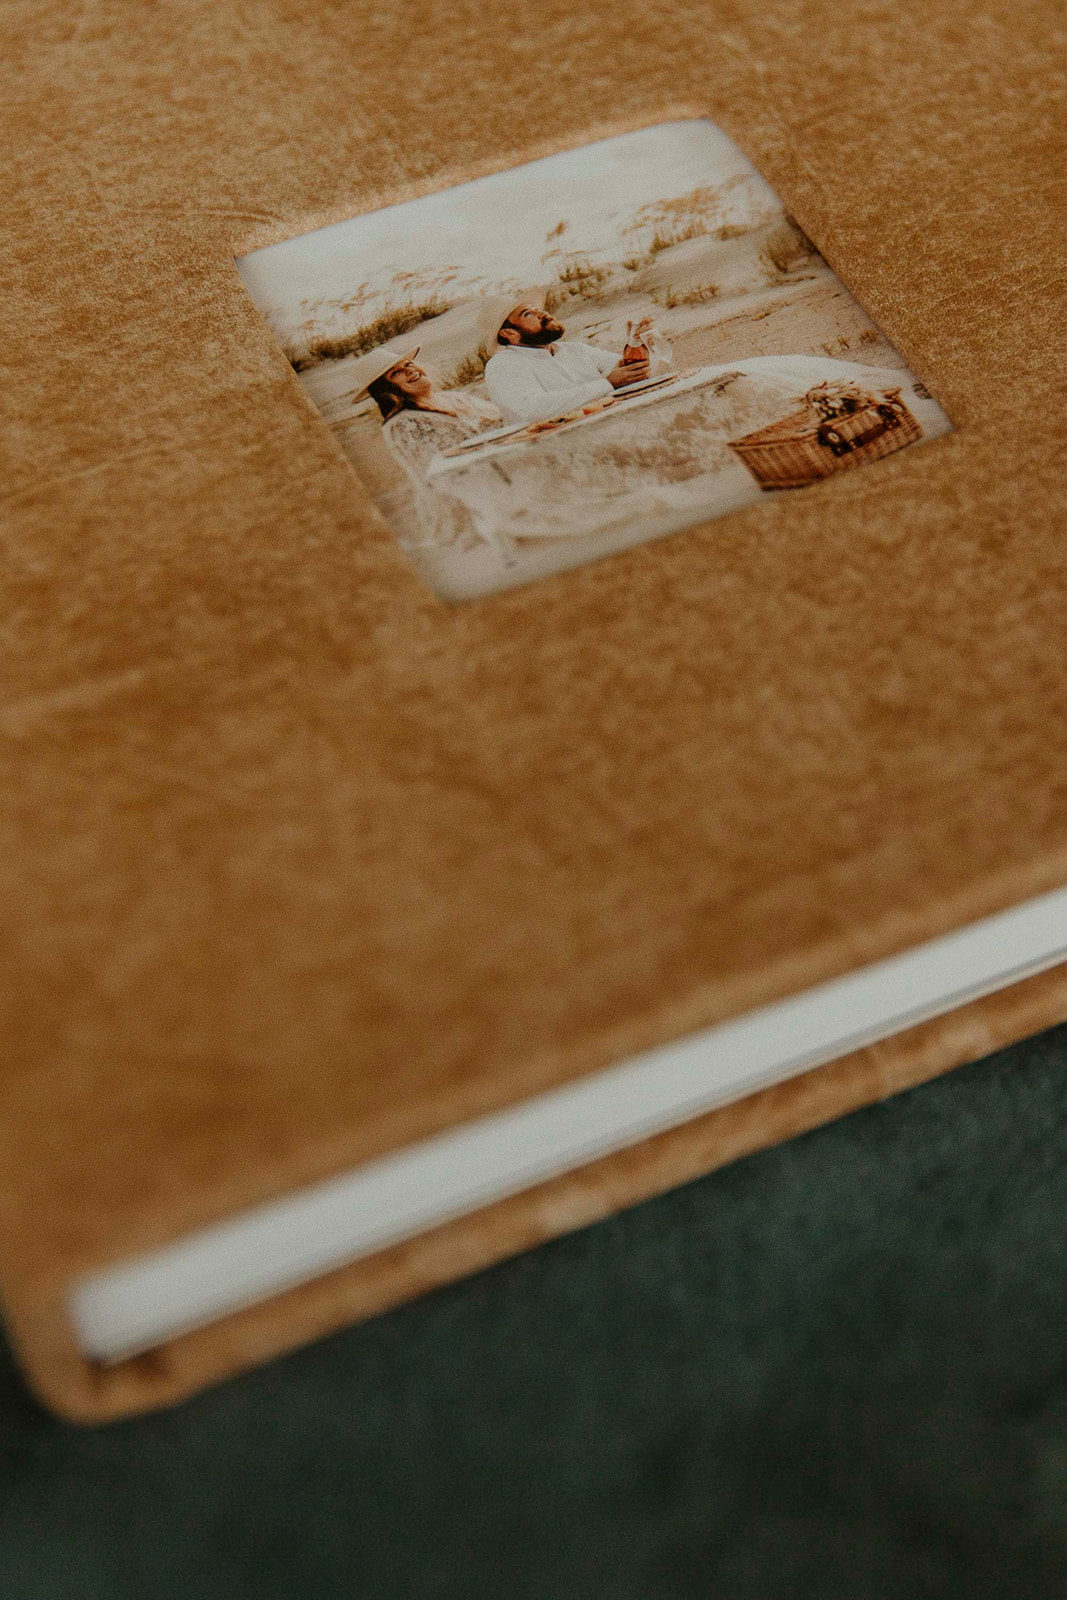 A close-up of a beige photo album with a small picture frame on the cover showing a scenic image, placed on a silver base.